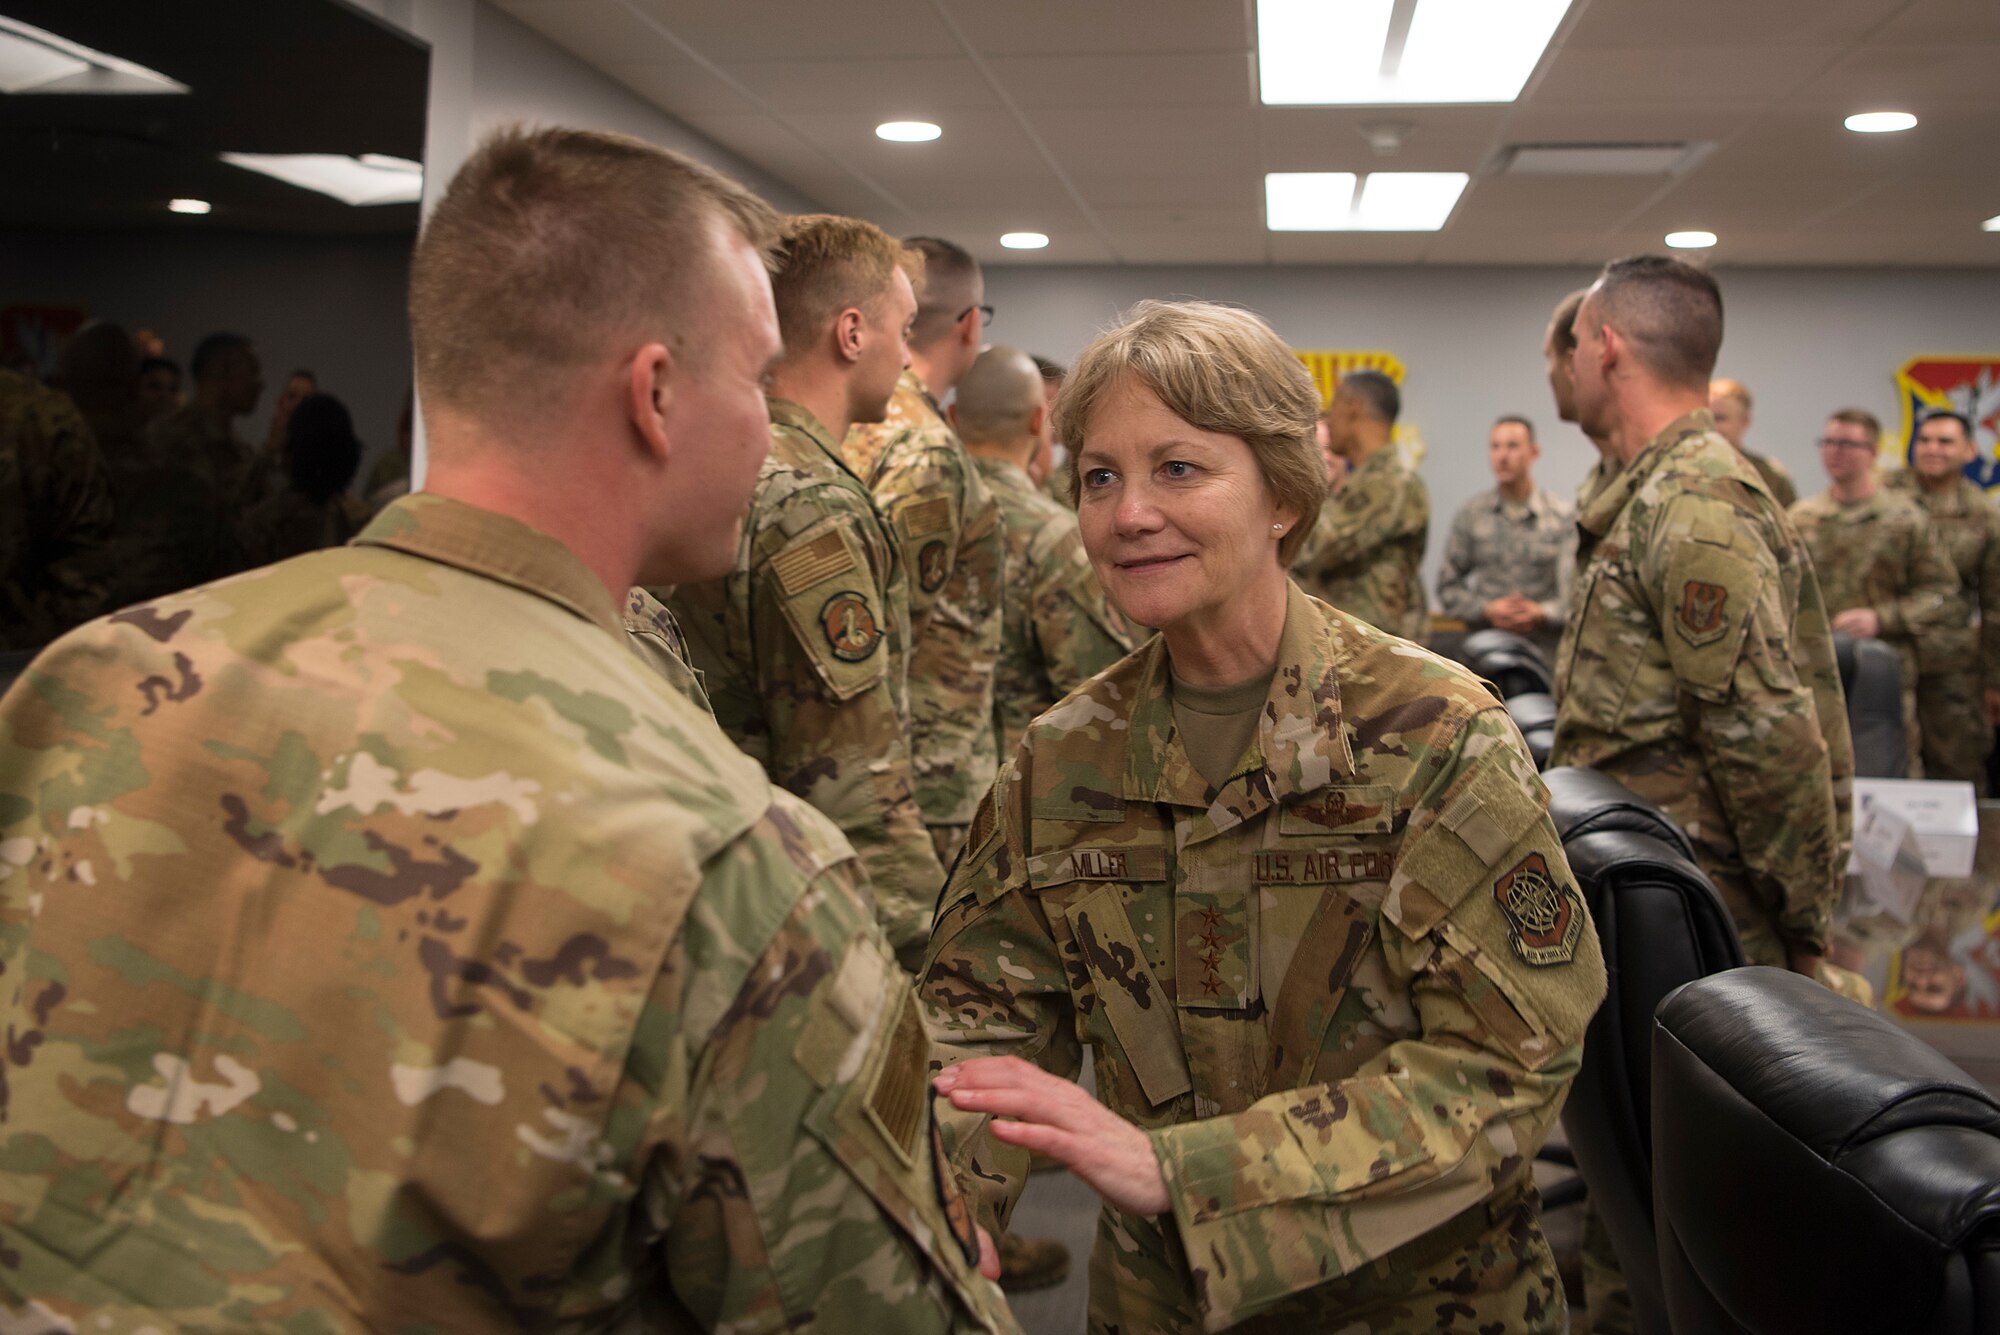 U.S. Air Force Gen. Maryanne Miller, Air Mobility Command commander, greets a 6th Air Refueling Wing Airman at MacDill Air Force Base, Fla., Feb. 13, 2020. During her visit, Miller met with aircraft maintenance Airmen and listened to their questions and concerns.